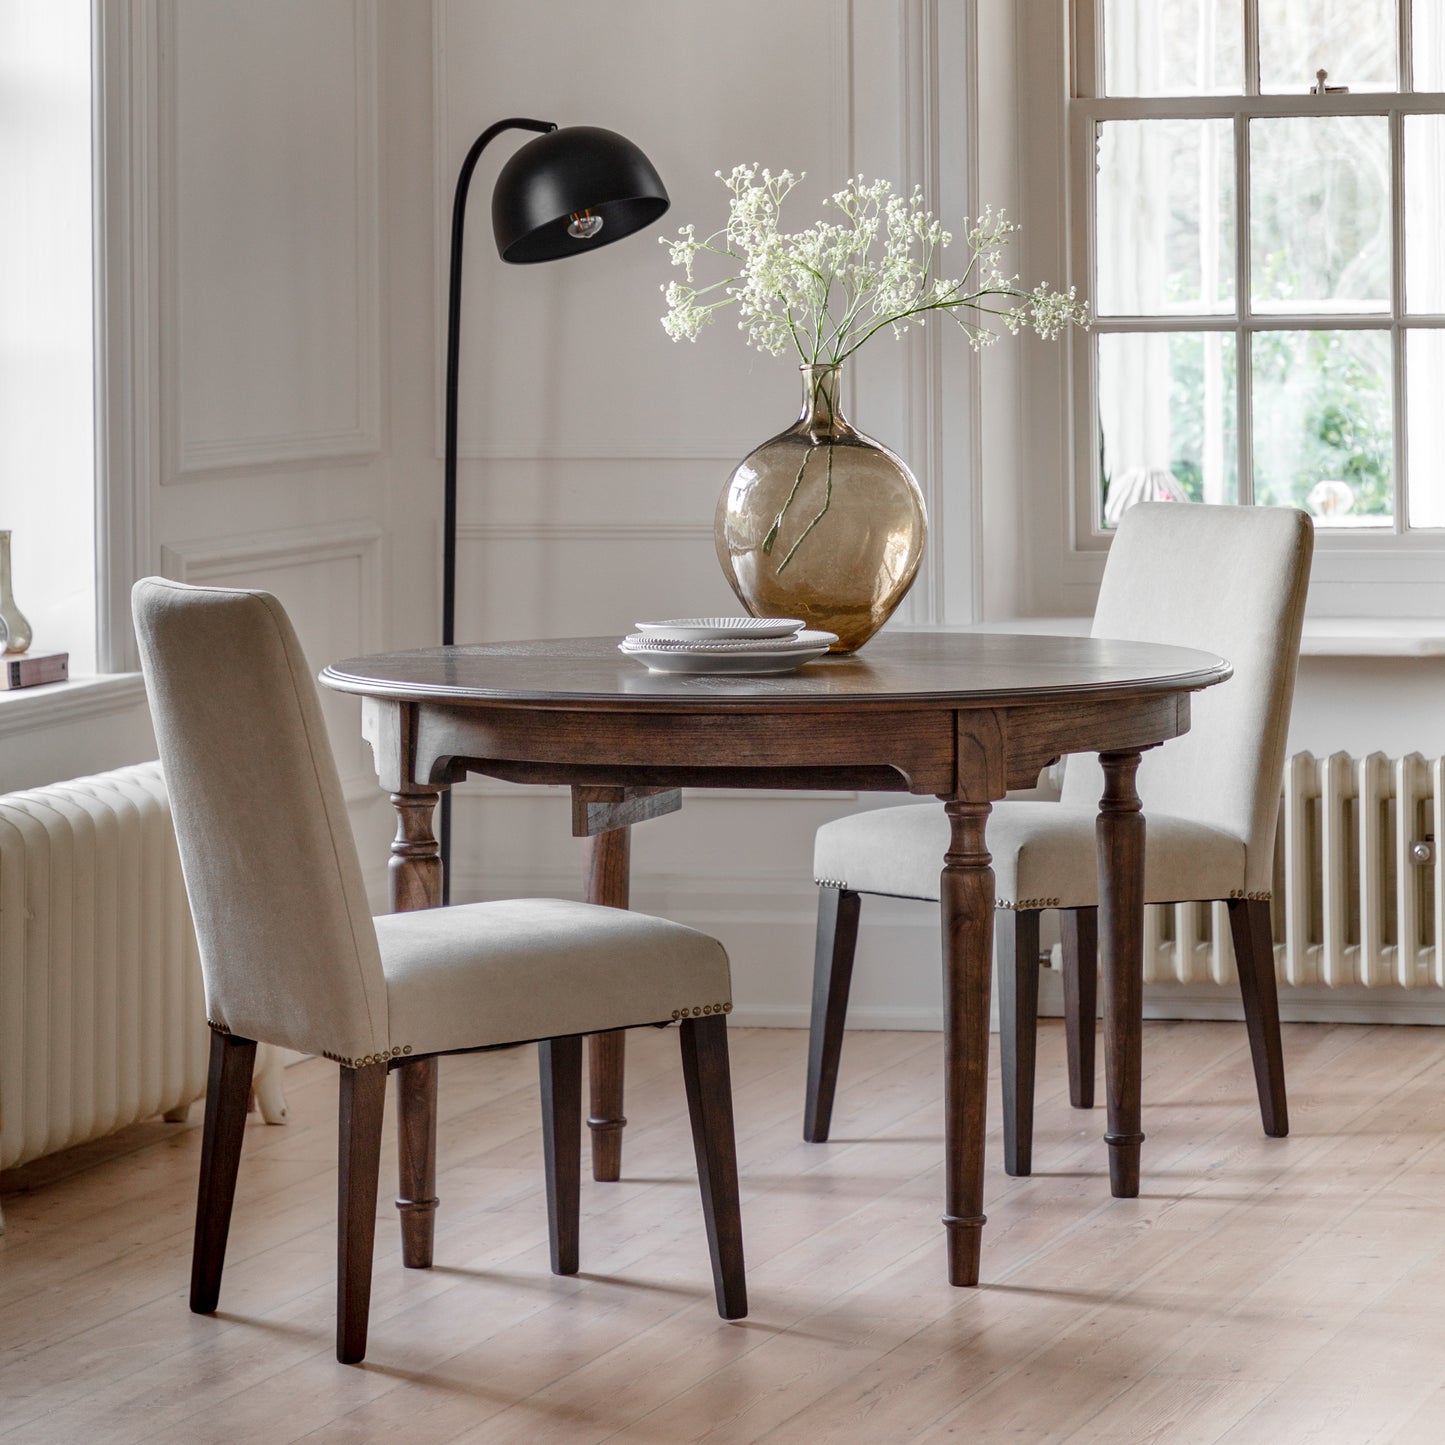 A dining room with stylish home furniture and interior decor from Kikiathome.co.uk.